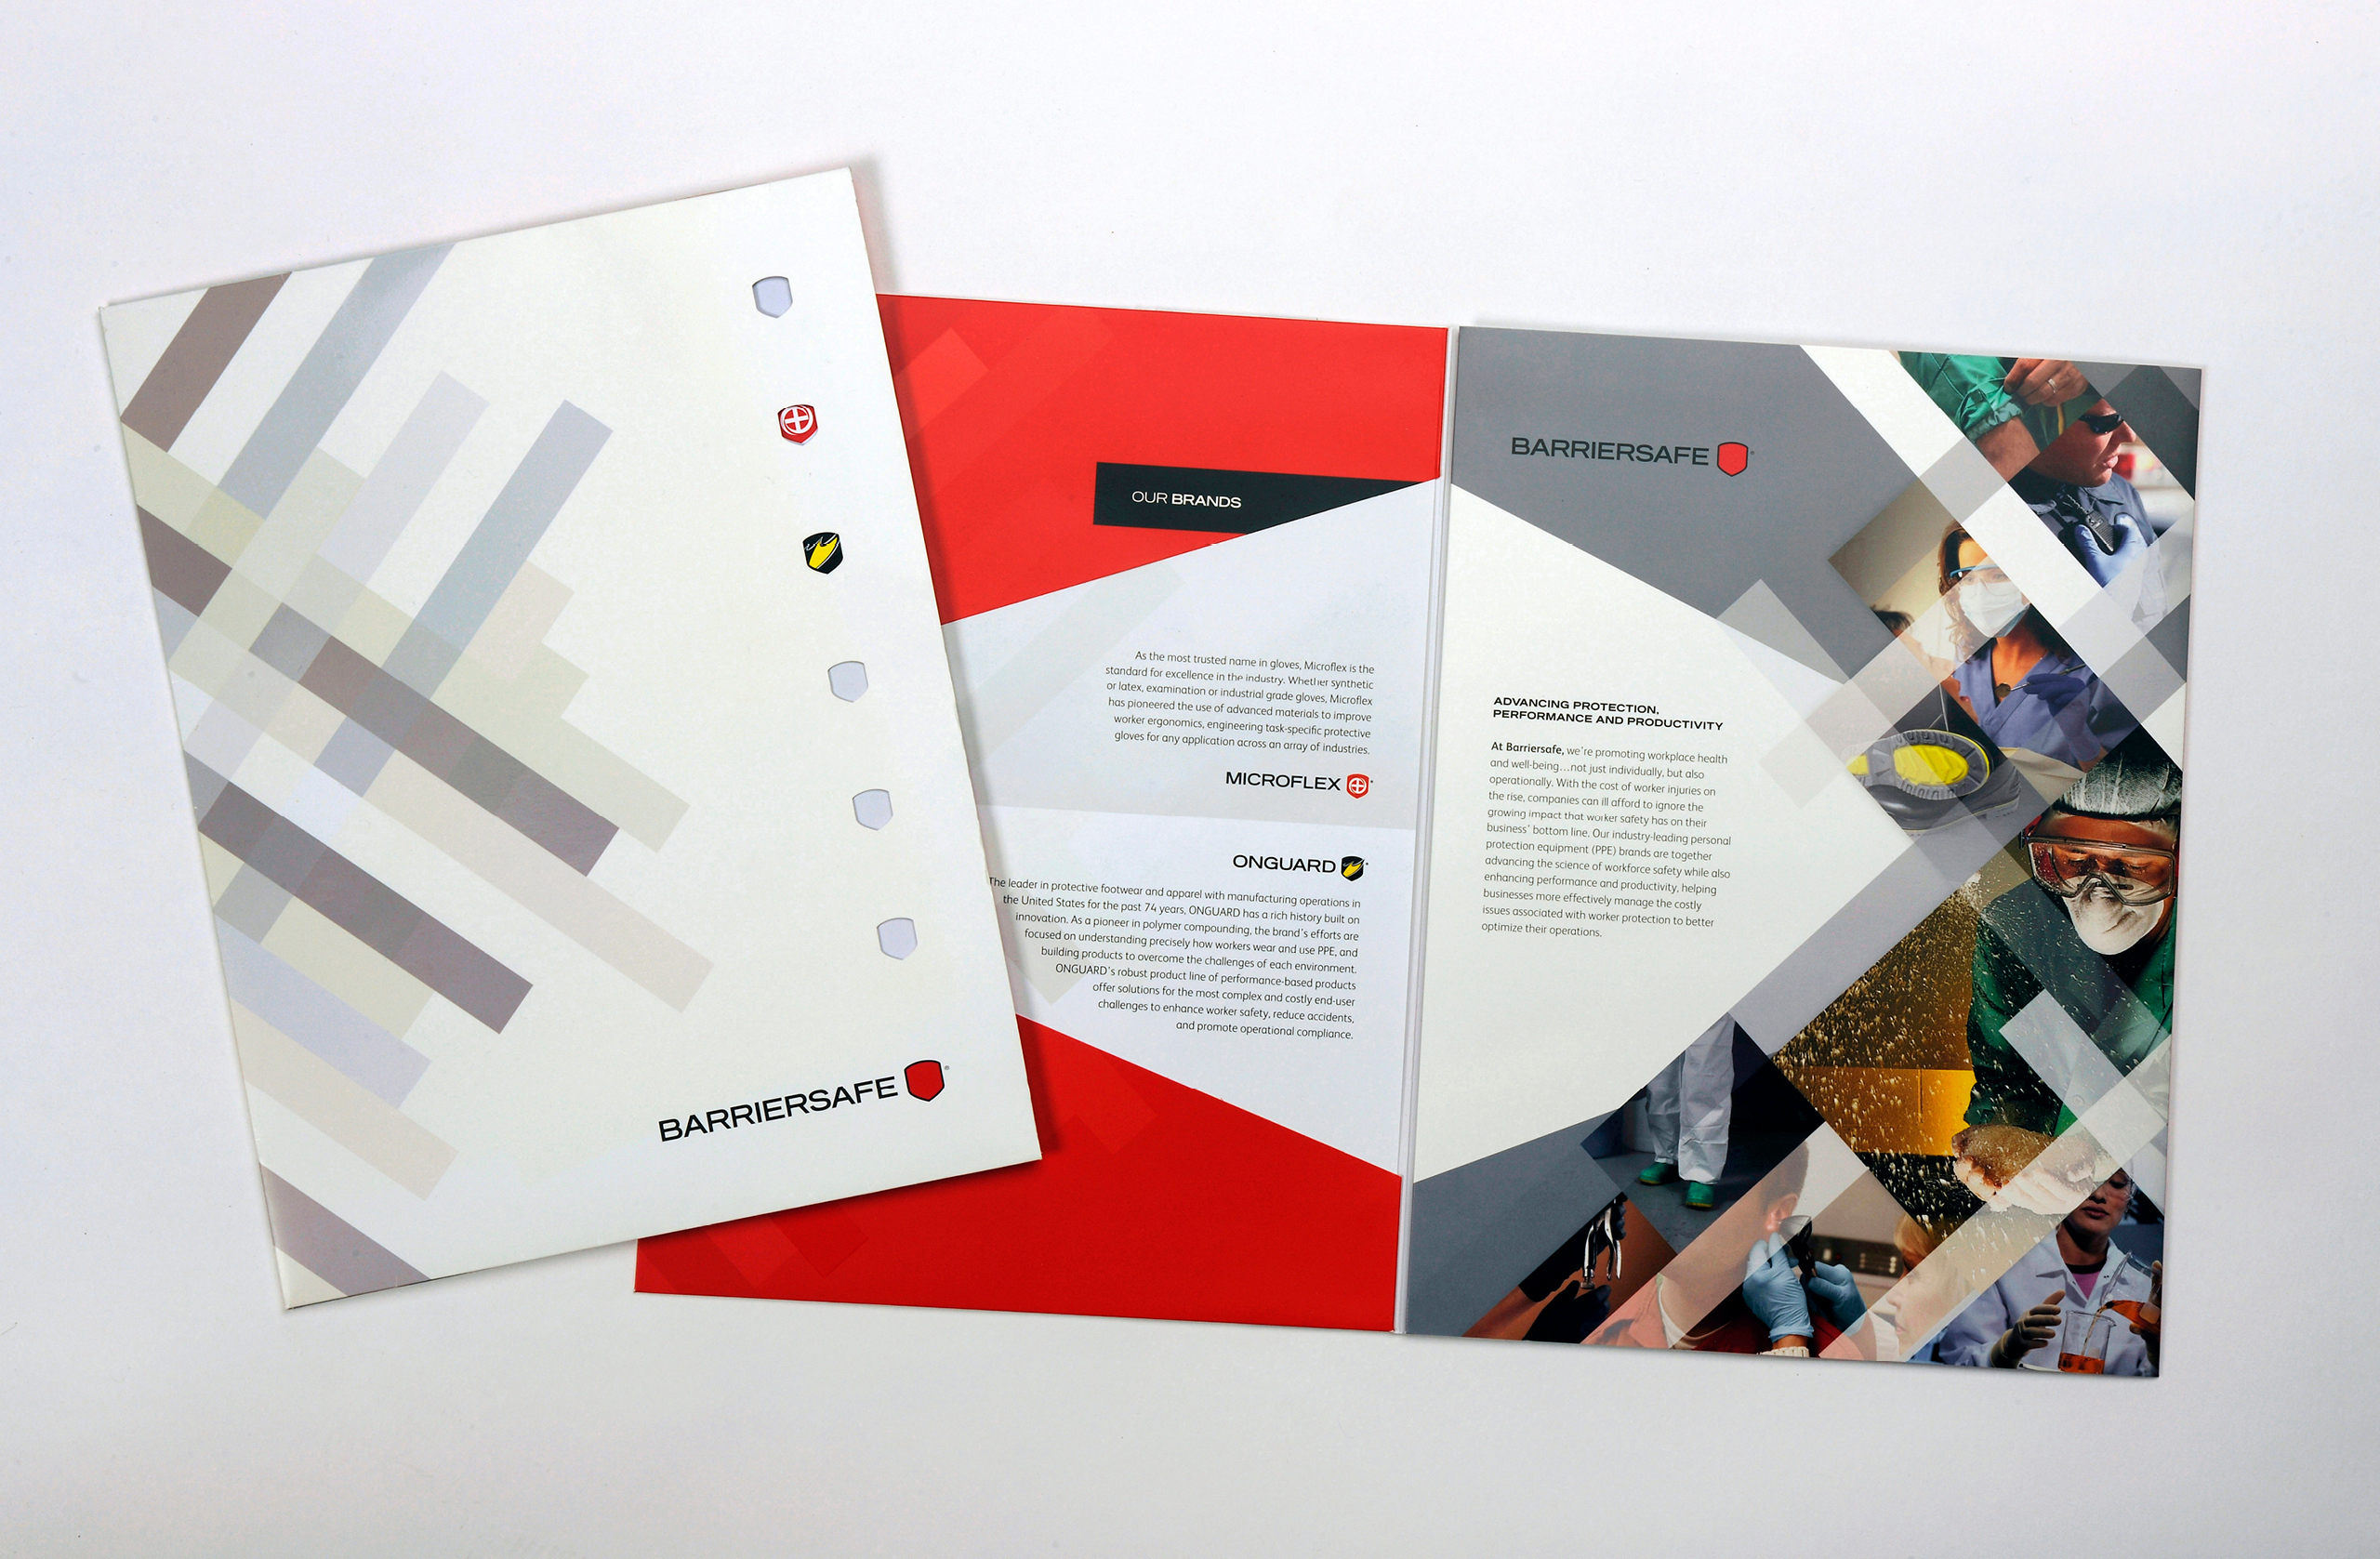 The portfolio was created with the expansion of brands in mind. As brands are acquired, new inserts can be created for the folder that include new brand logos..